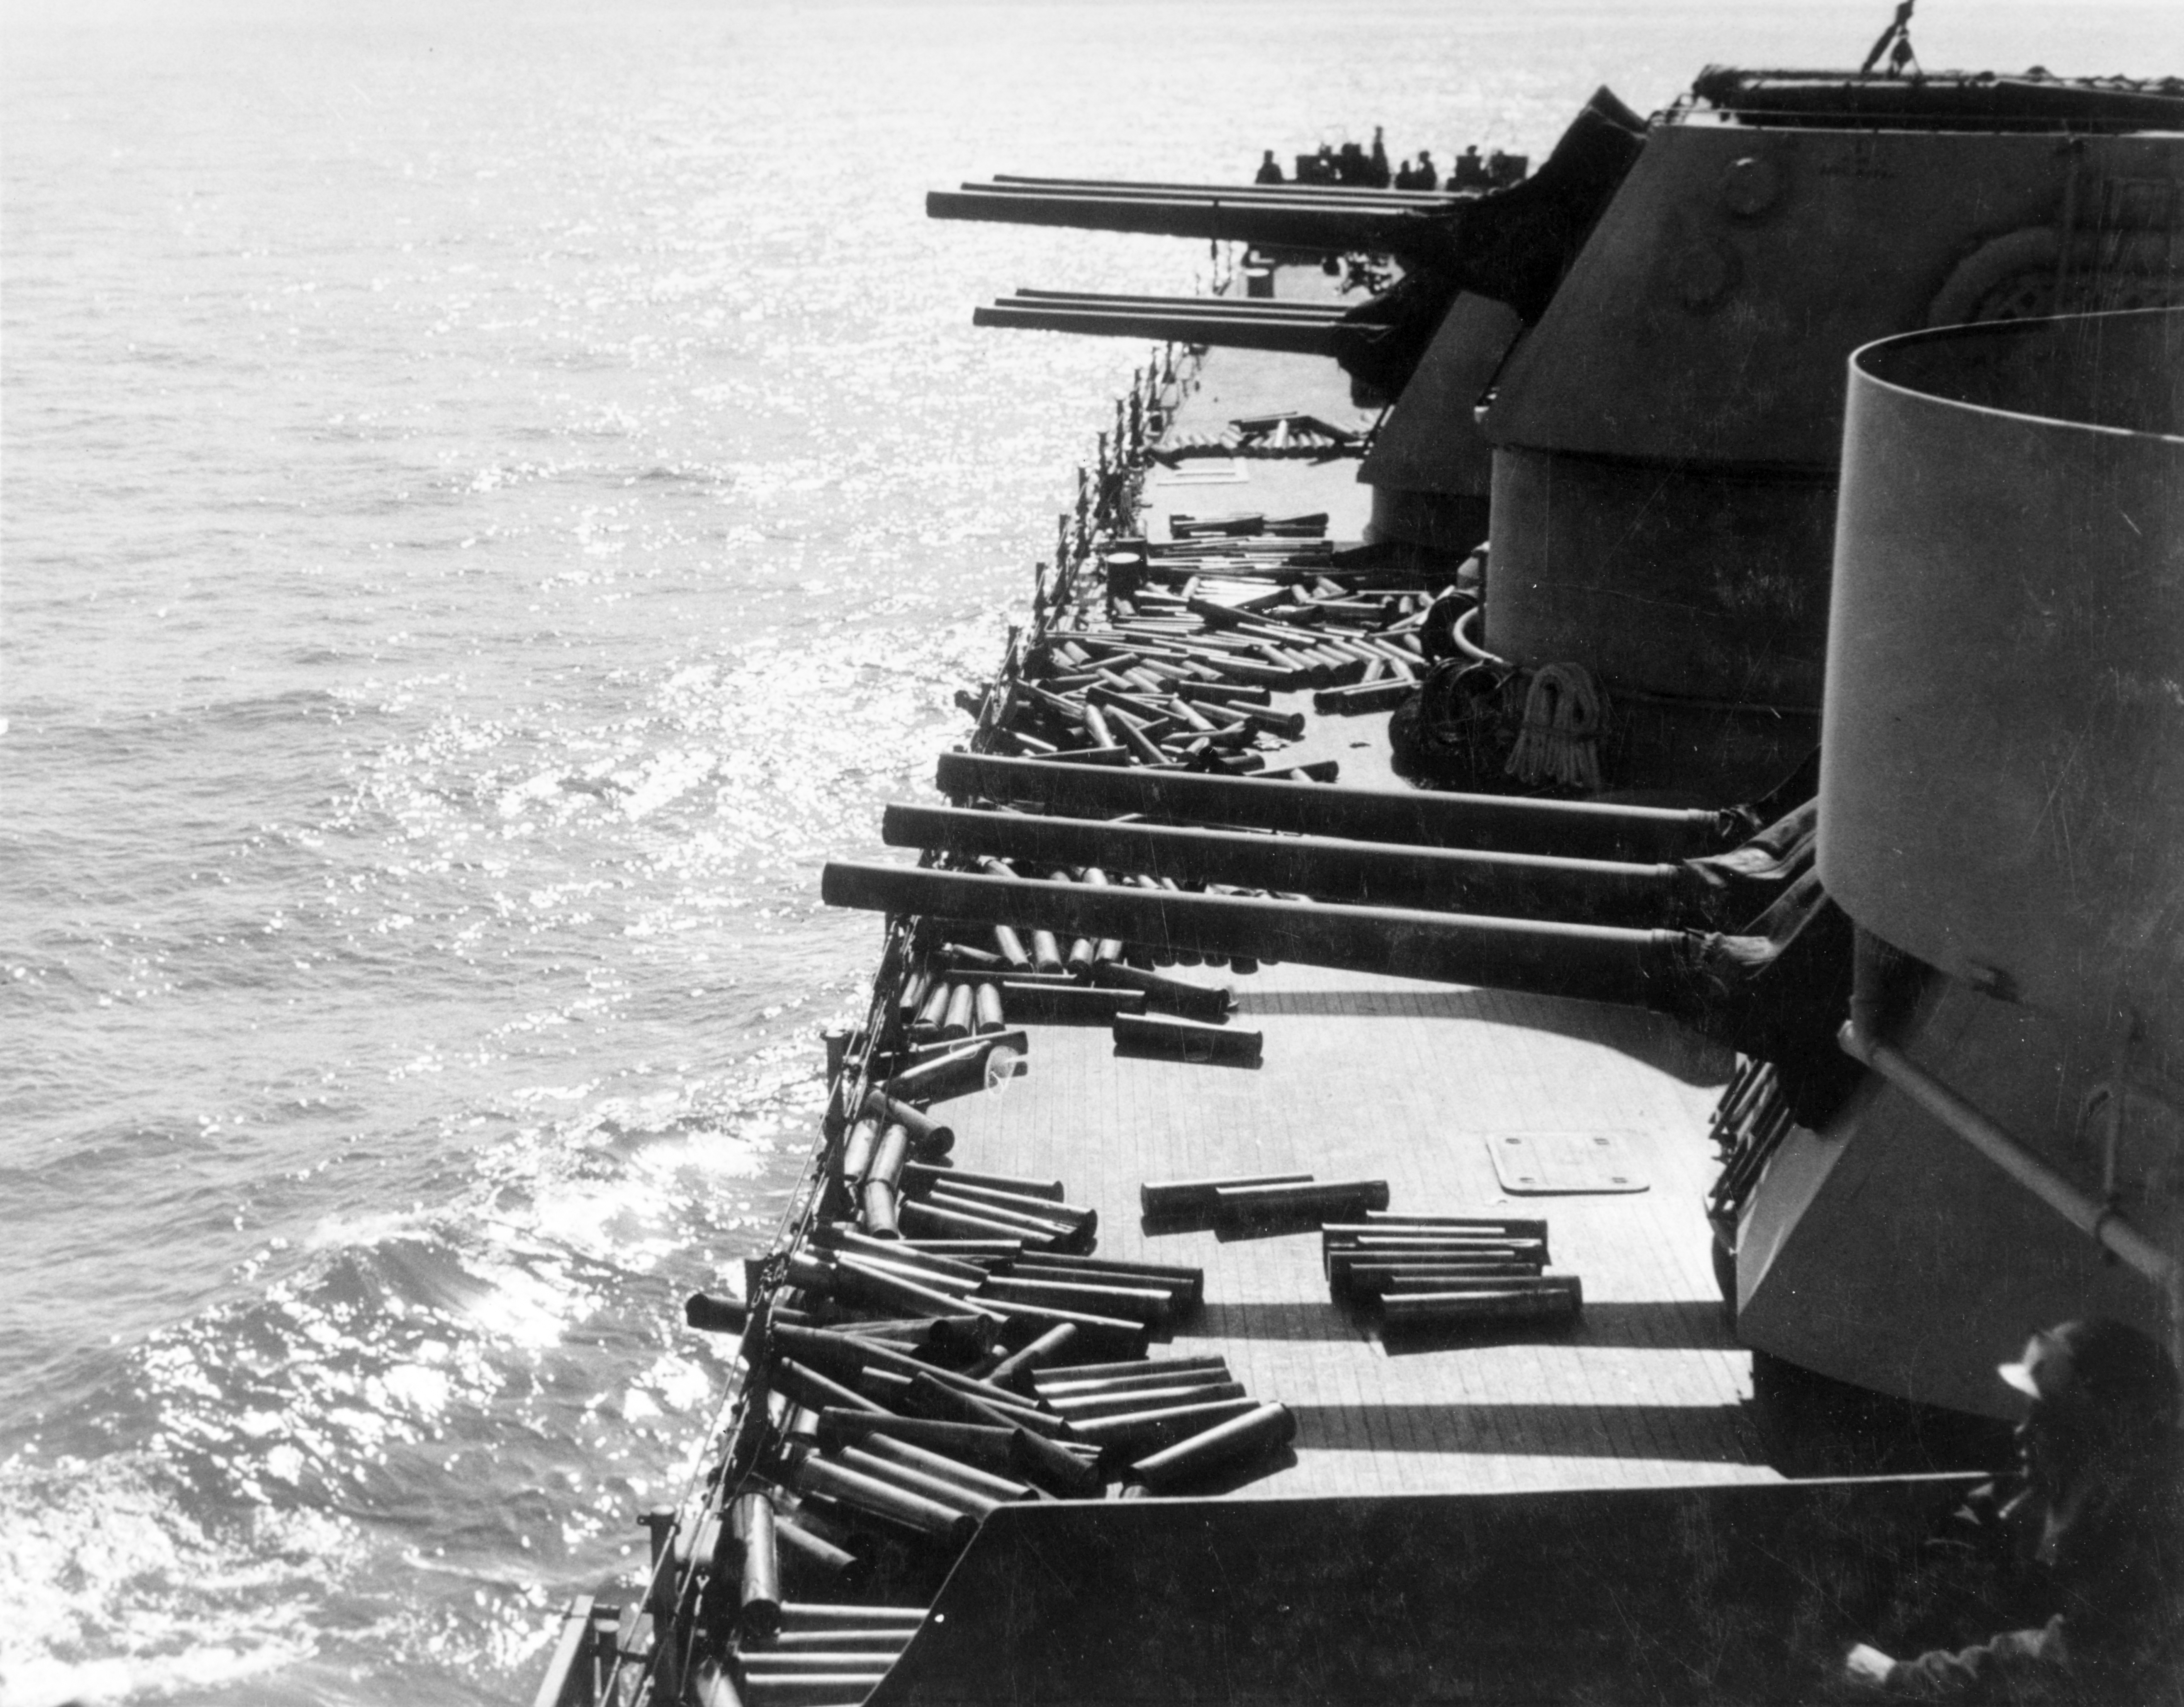 Guns_and_shell_casings_on_board_USS_Brooklyn_%28CL-40%29_during_Sicily_invasion%2C_July_1943.jpg